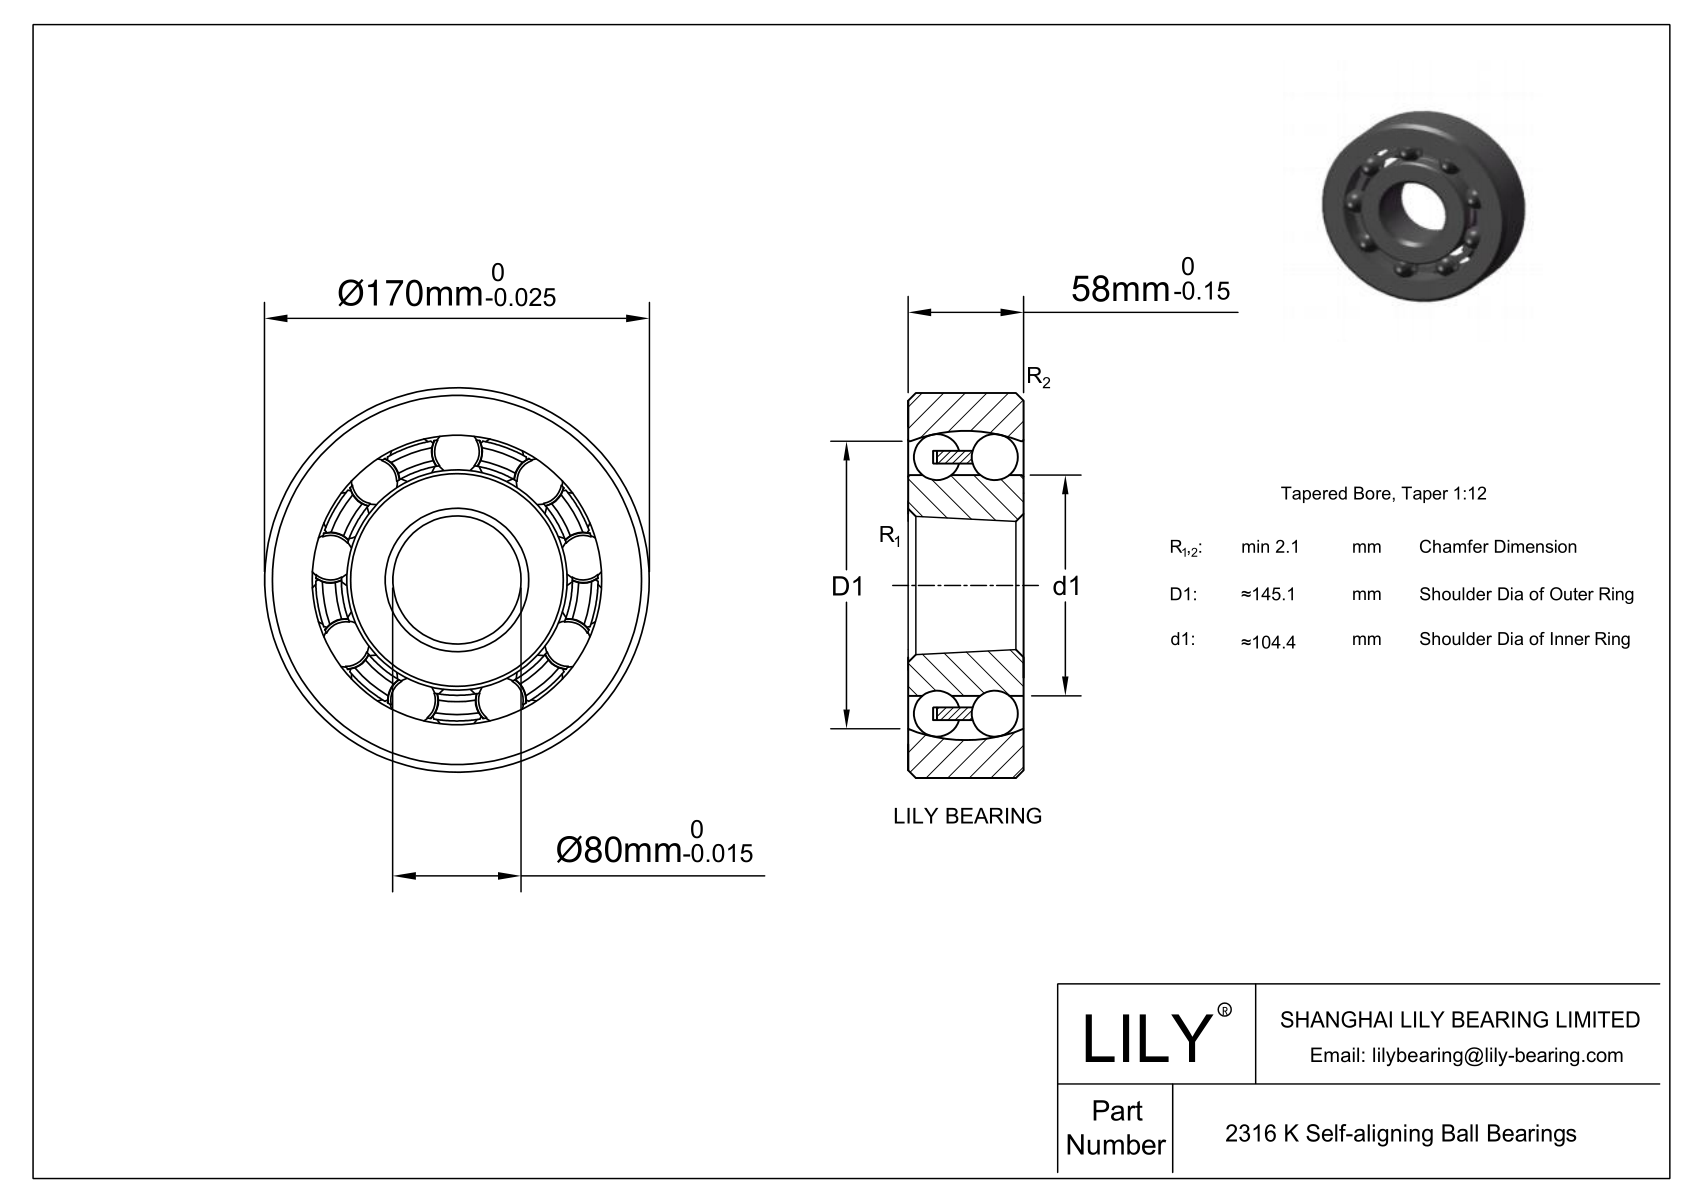 S2316 K Stainless Steel Self Aligning Ball Bearings cad drawing